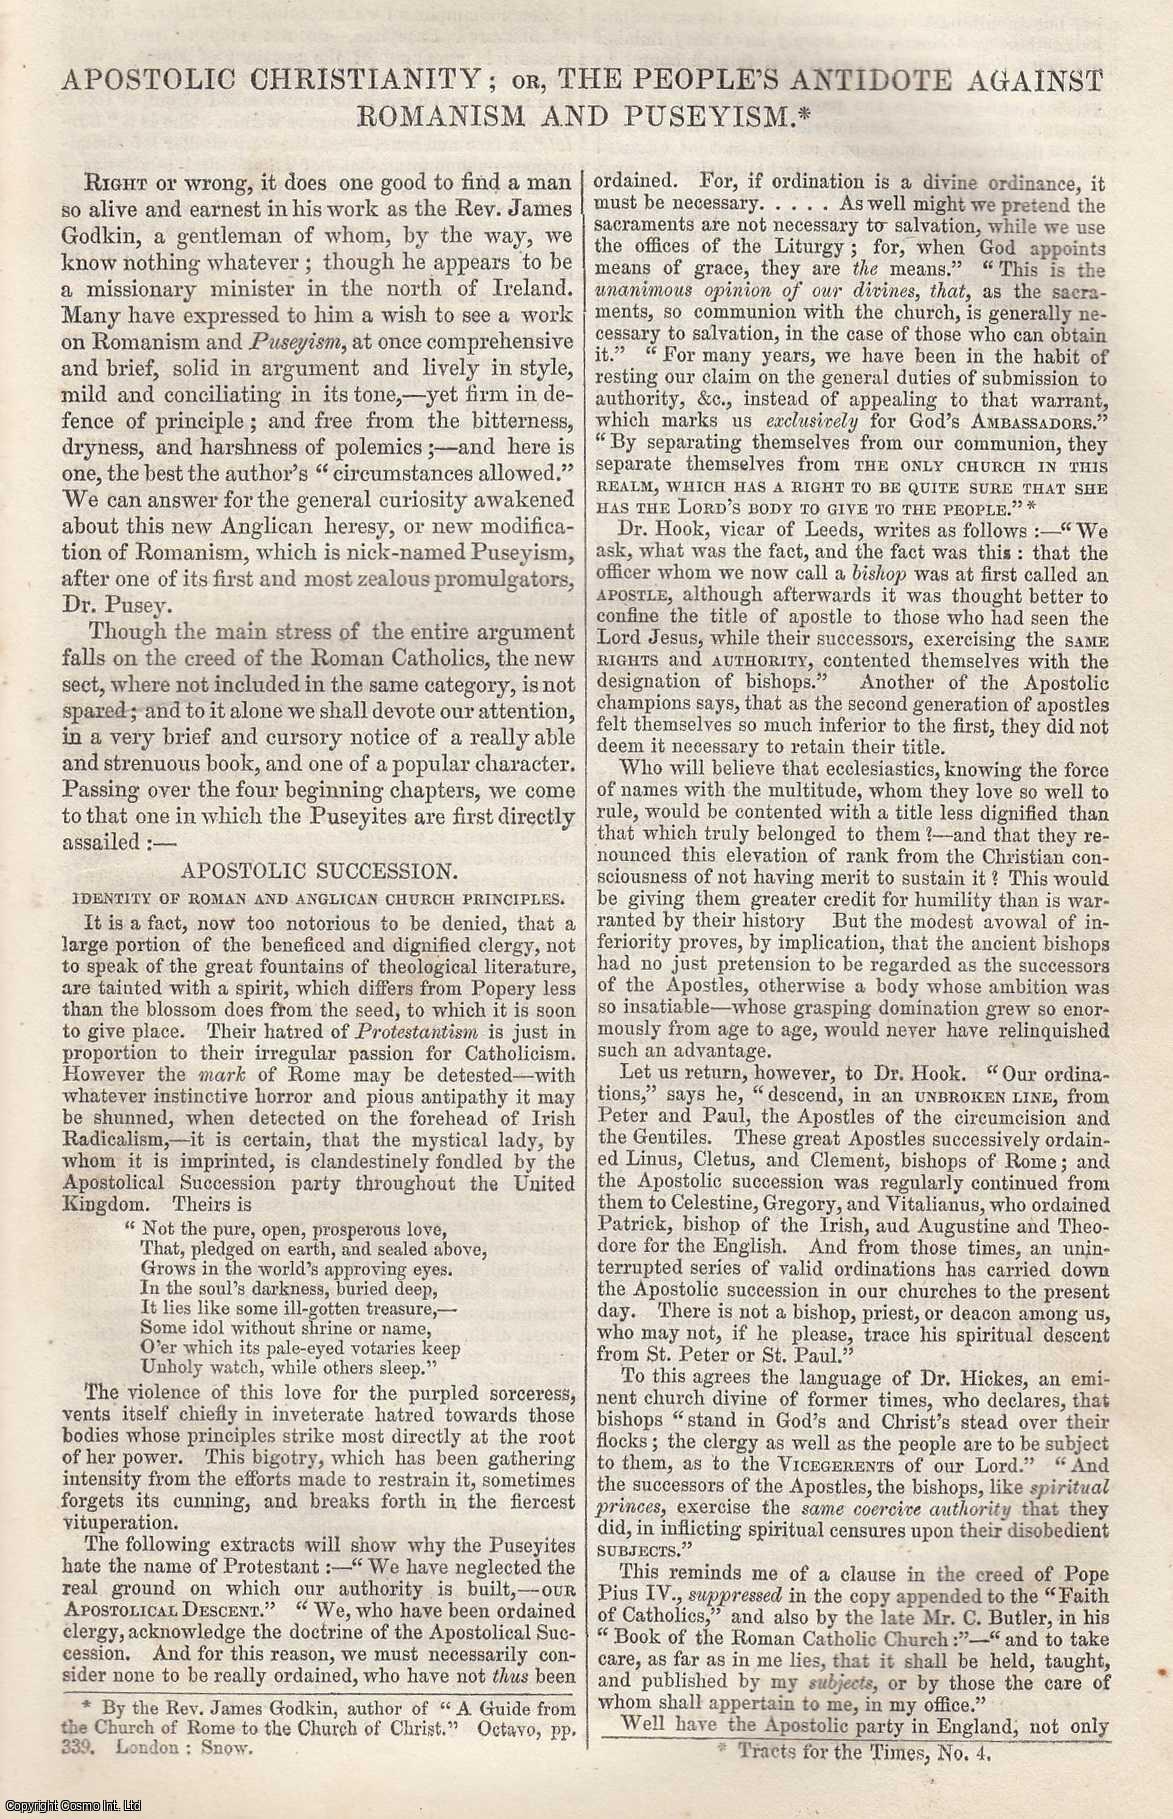 Johnstone, Christian - Apostolic Christianity; or, The People's Antidote Against Romanism and Puseyism. An original article from Tait's Edinburgh Magazine, 1843.